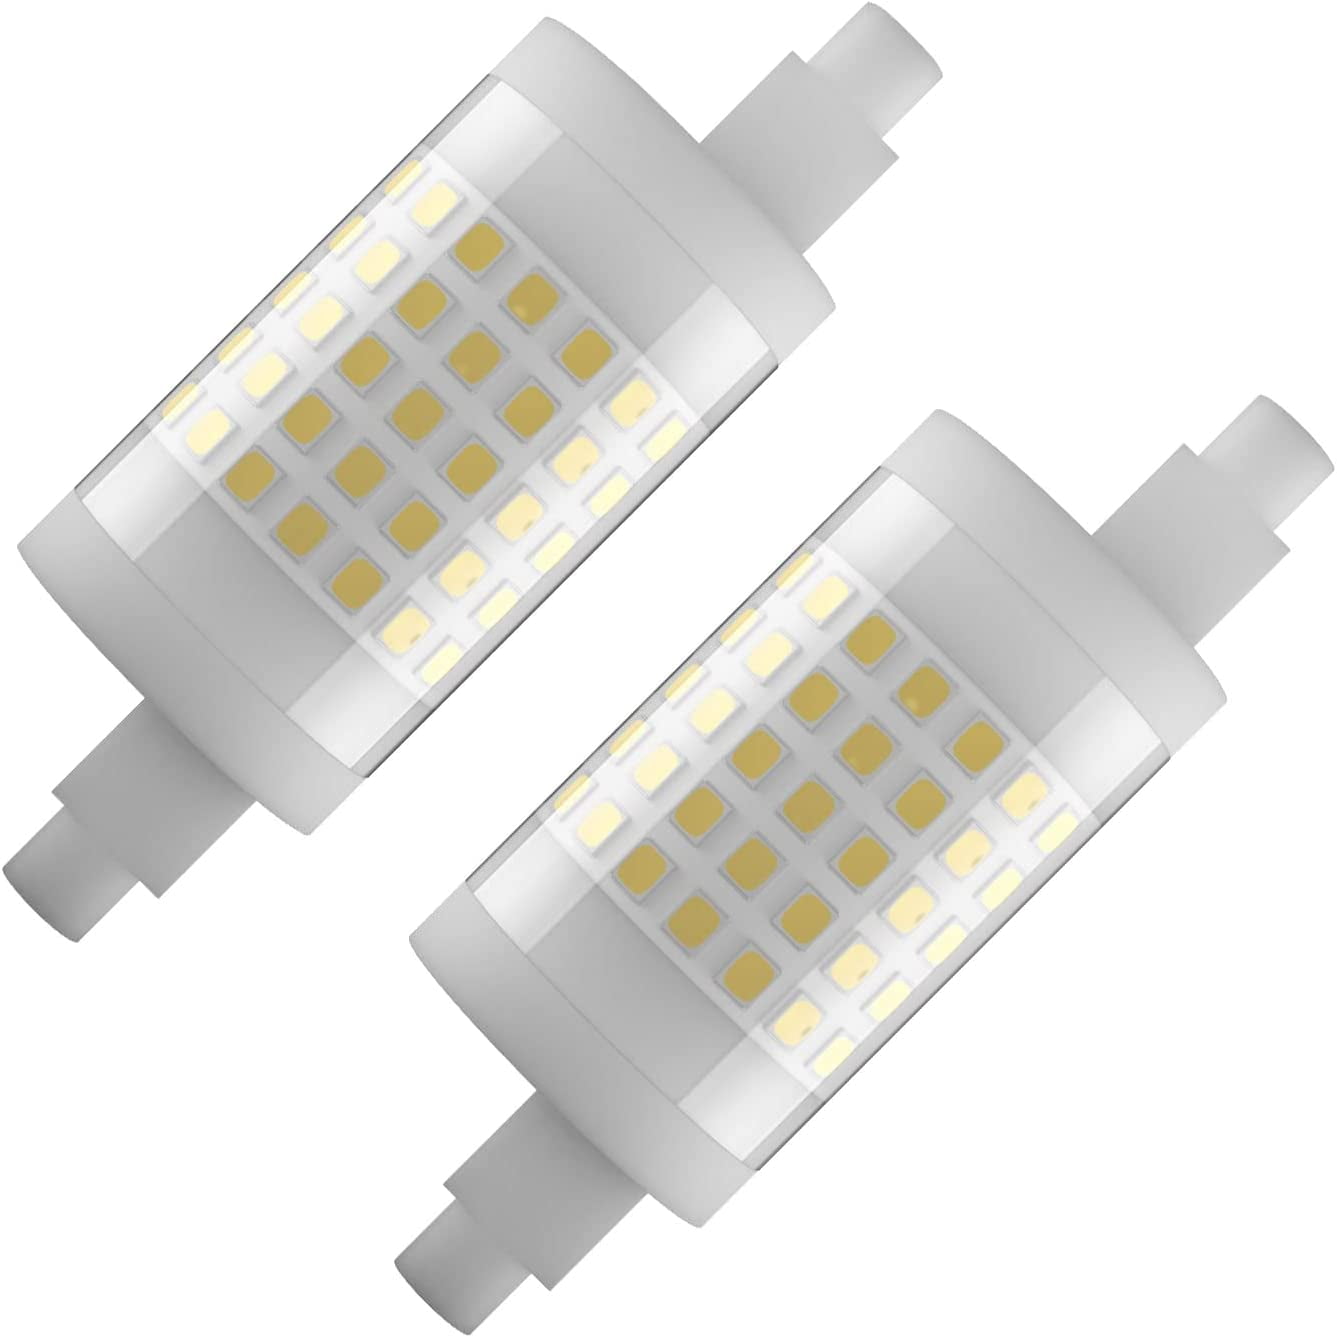 LED Bulb 78MM, 10W Dimmable J78 Flood Light, 100W Halogen T3 Replacement, Warm White 3000K, Pack of 2 - Walmart.com